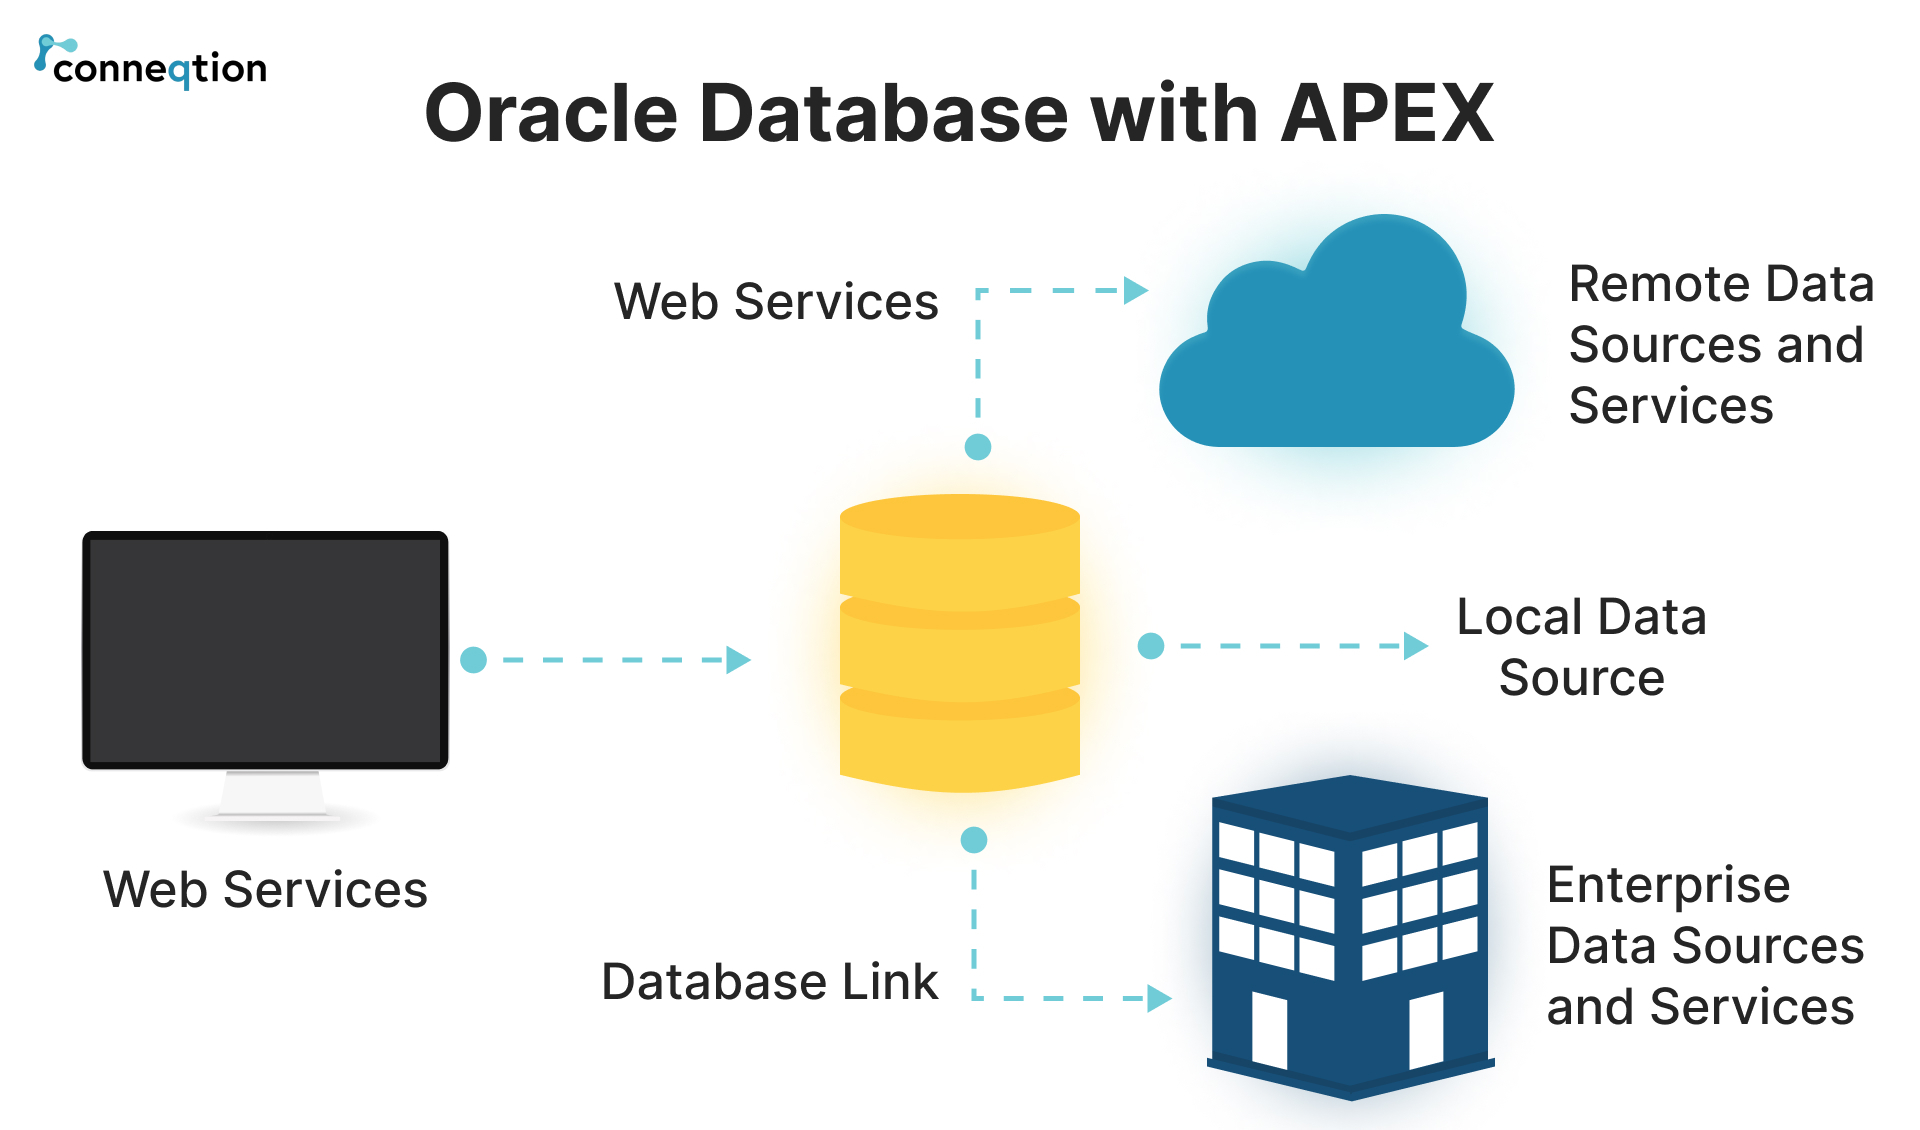 Oracle Database with APEX